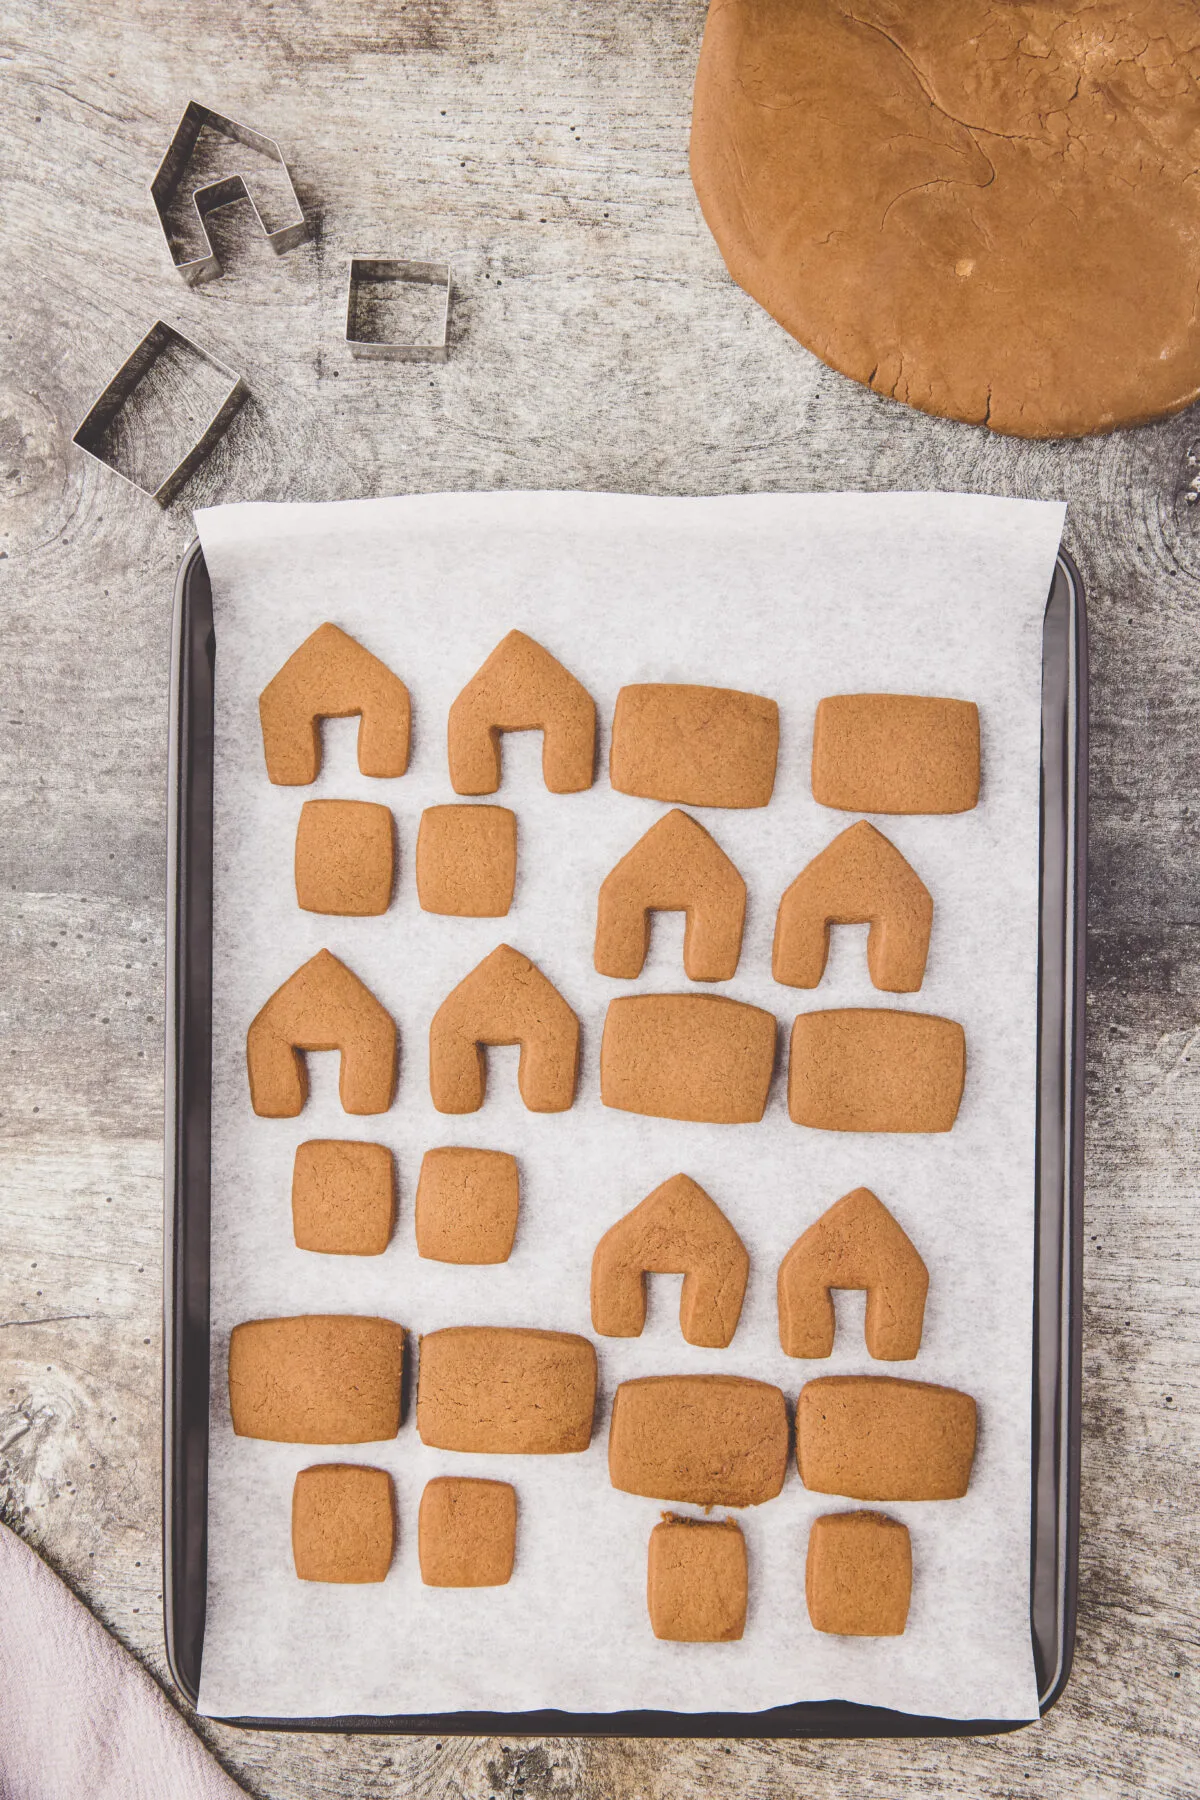 Gingerbread pieces baked on a baking sheet.